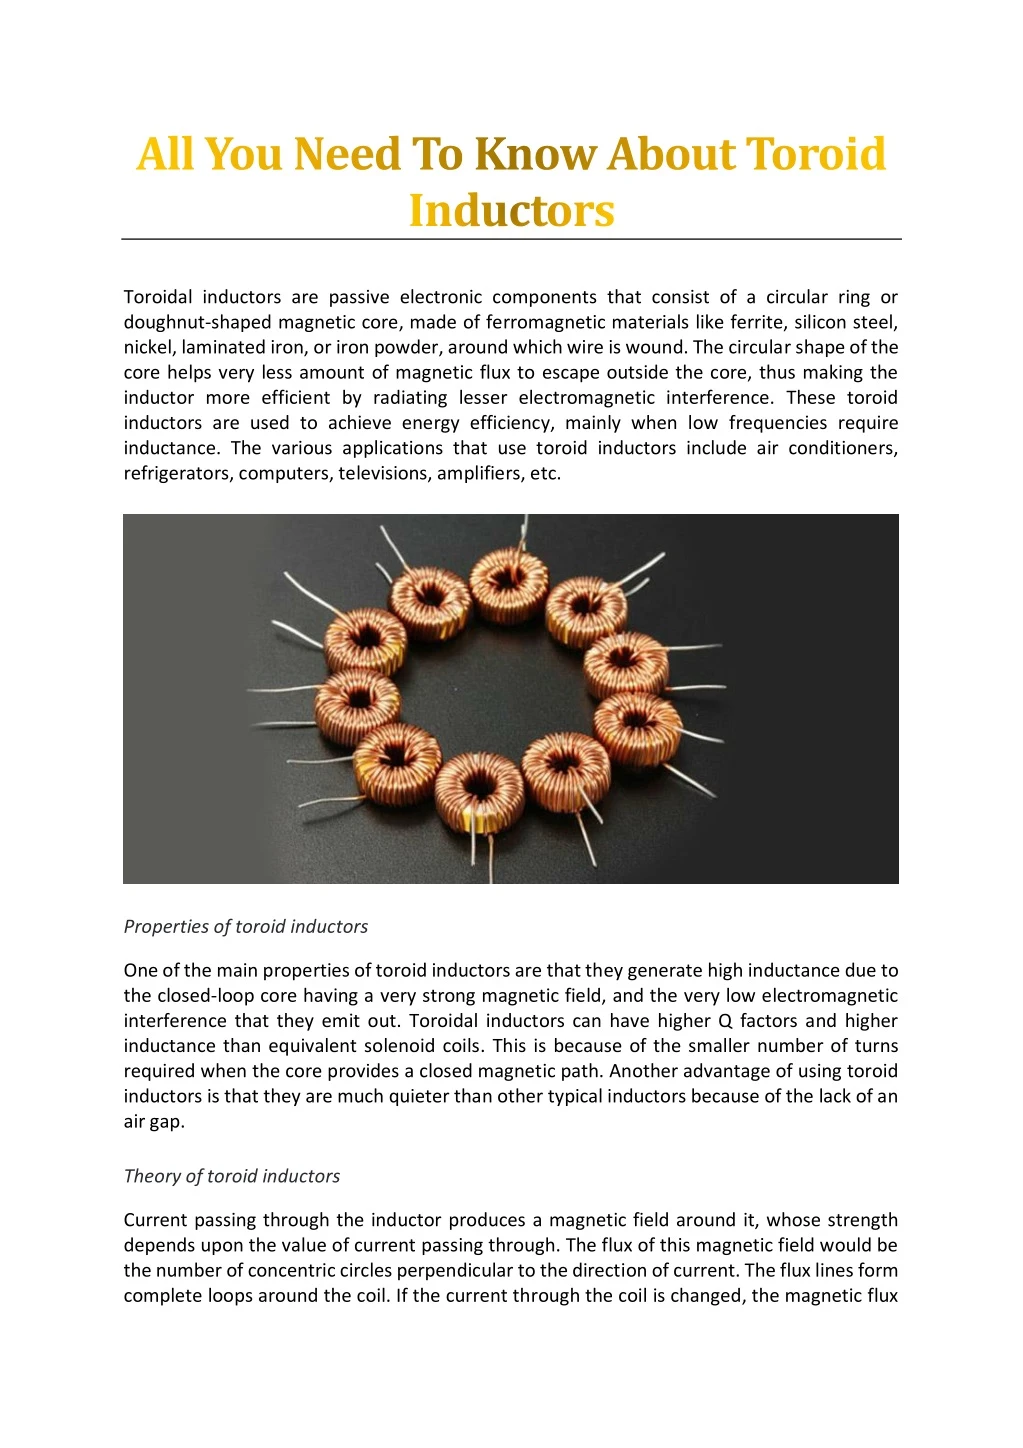 toroidal inductors are passive electronic